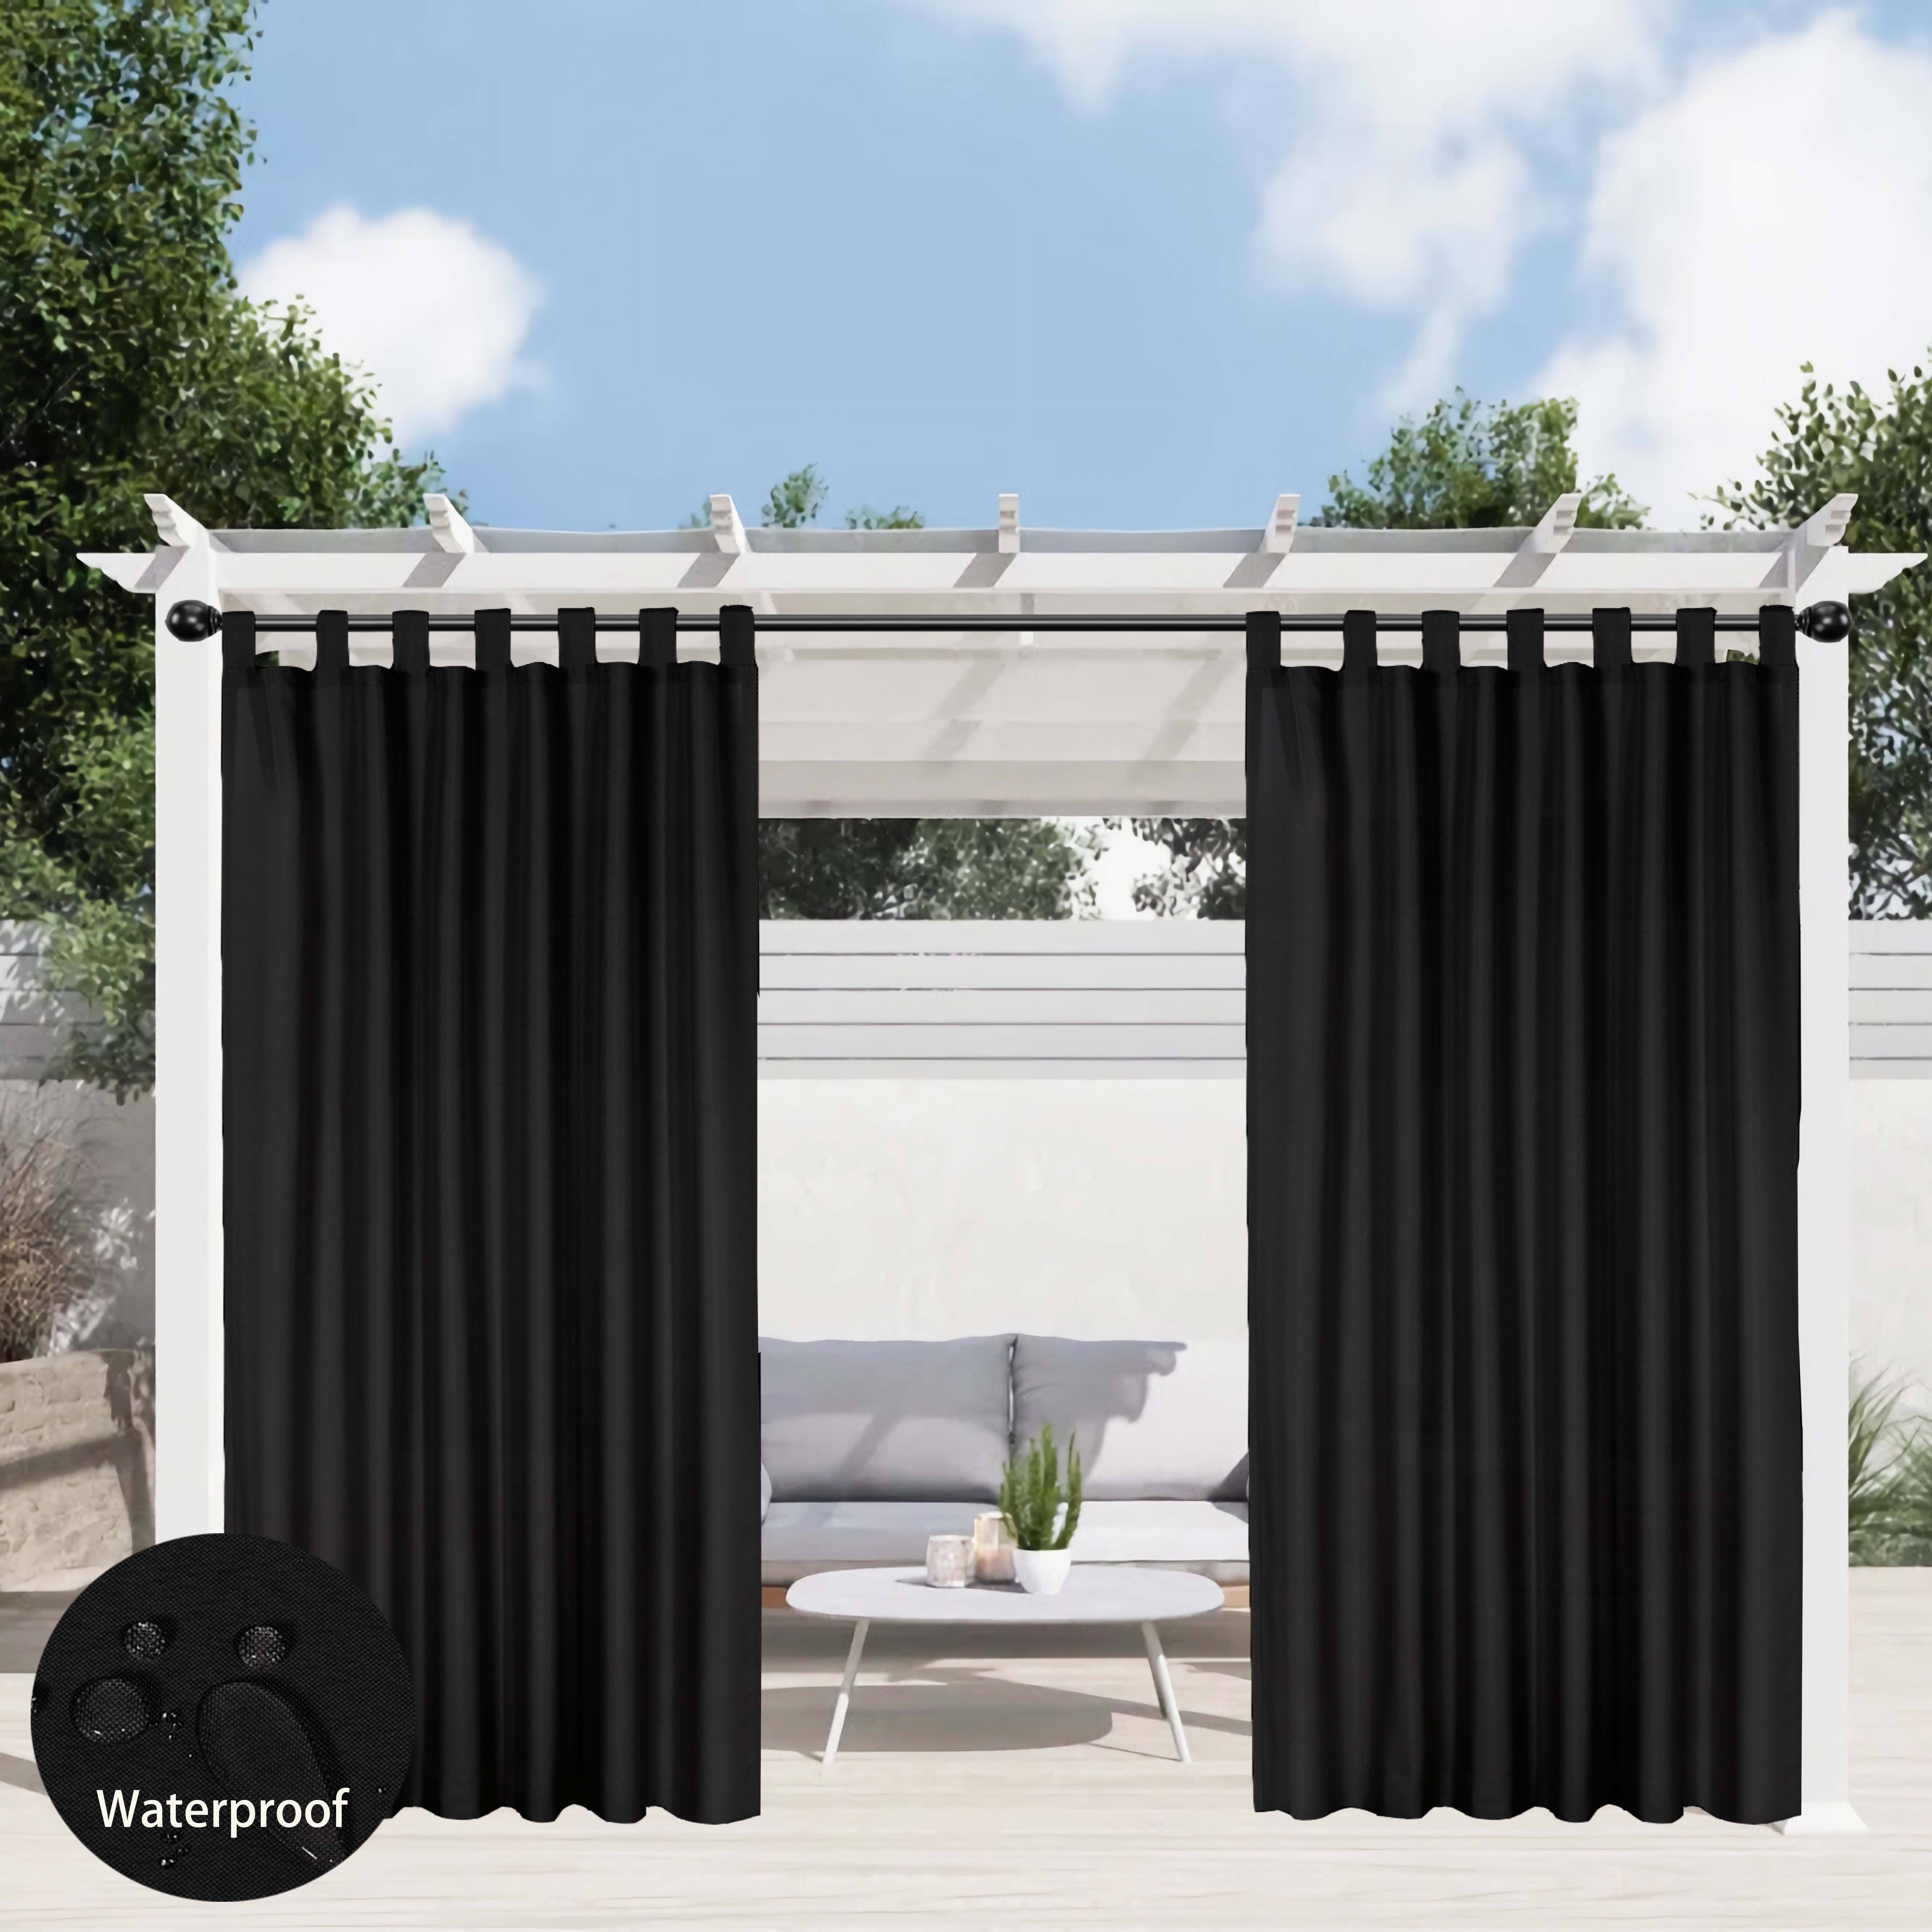 

Luxurious Waterproof Outdoor Curtain - Light-filtering, Weatherproof With Tab Top Design For Porch, Pergola, Gazebo & Deck Decor Outdoor Curtains Outdoor Curtains For Patio Waterproof